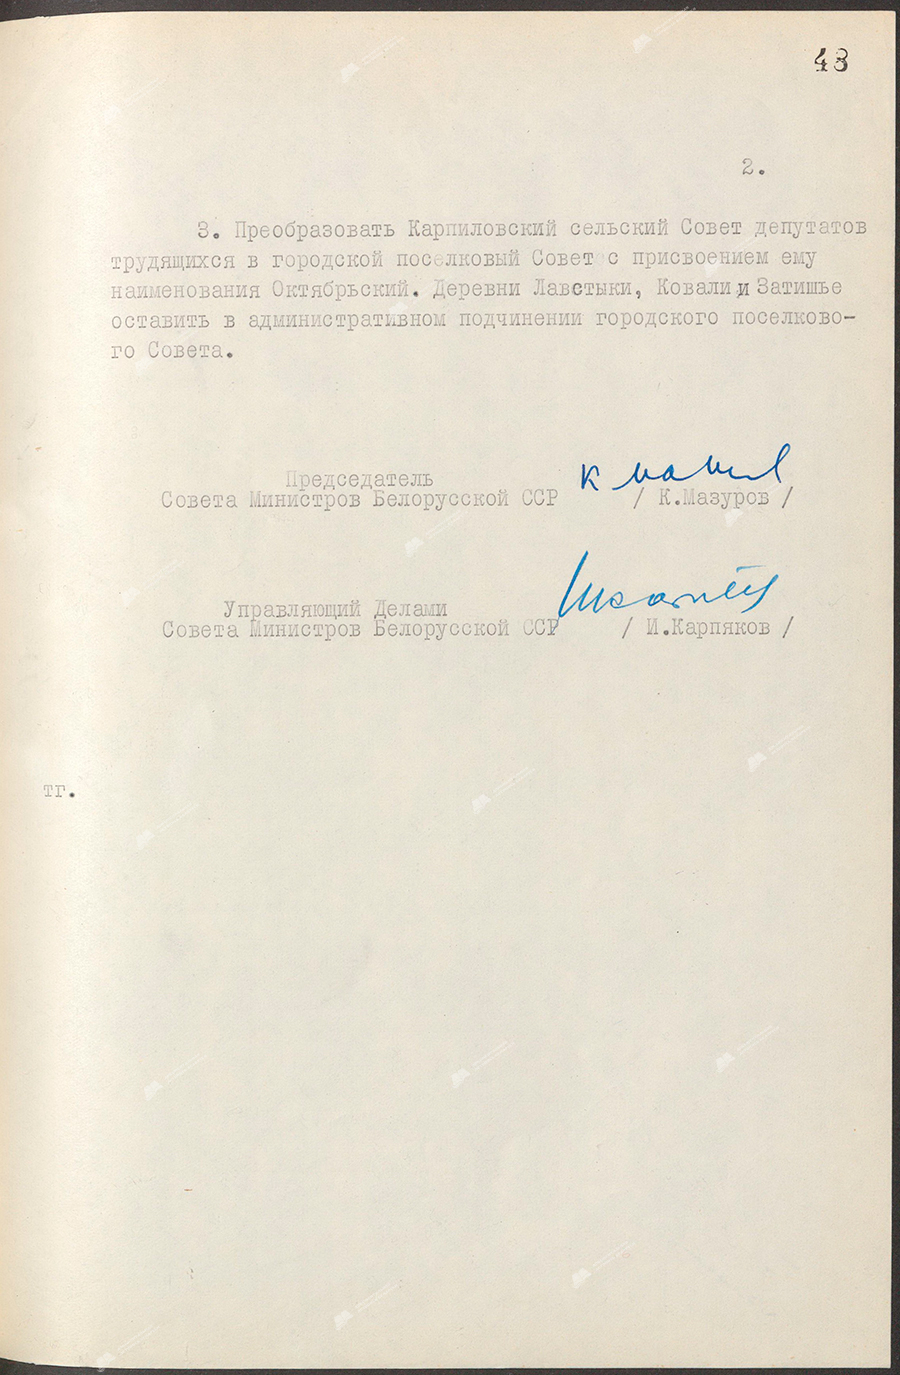 Resolution No. 304 of the Council of Ministers of the Byelorussian SSR «On classifying the regional center of the Oktyabrsky district as an urban settlement»-стр. 1